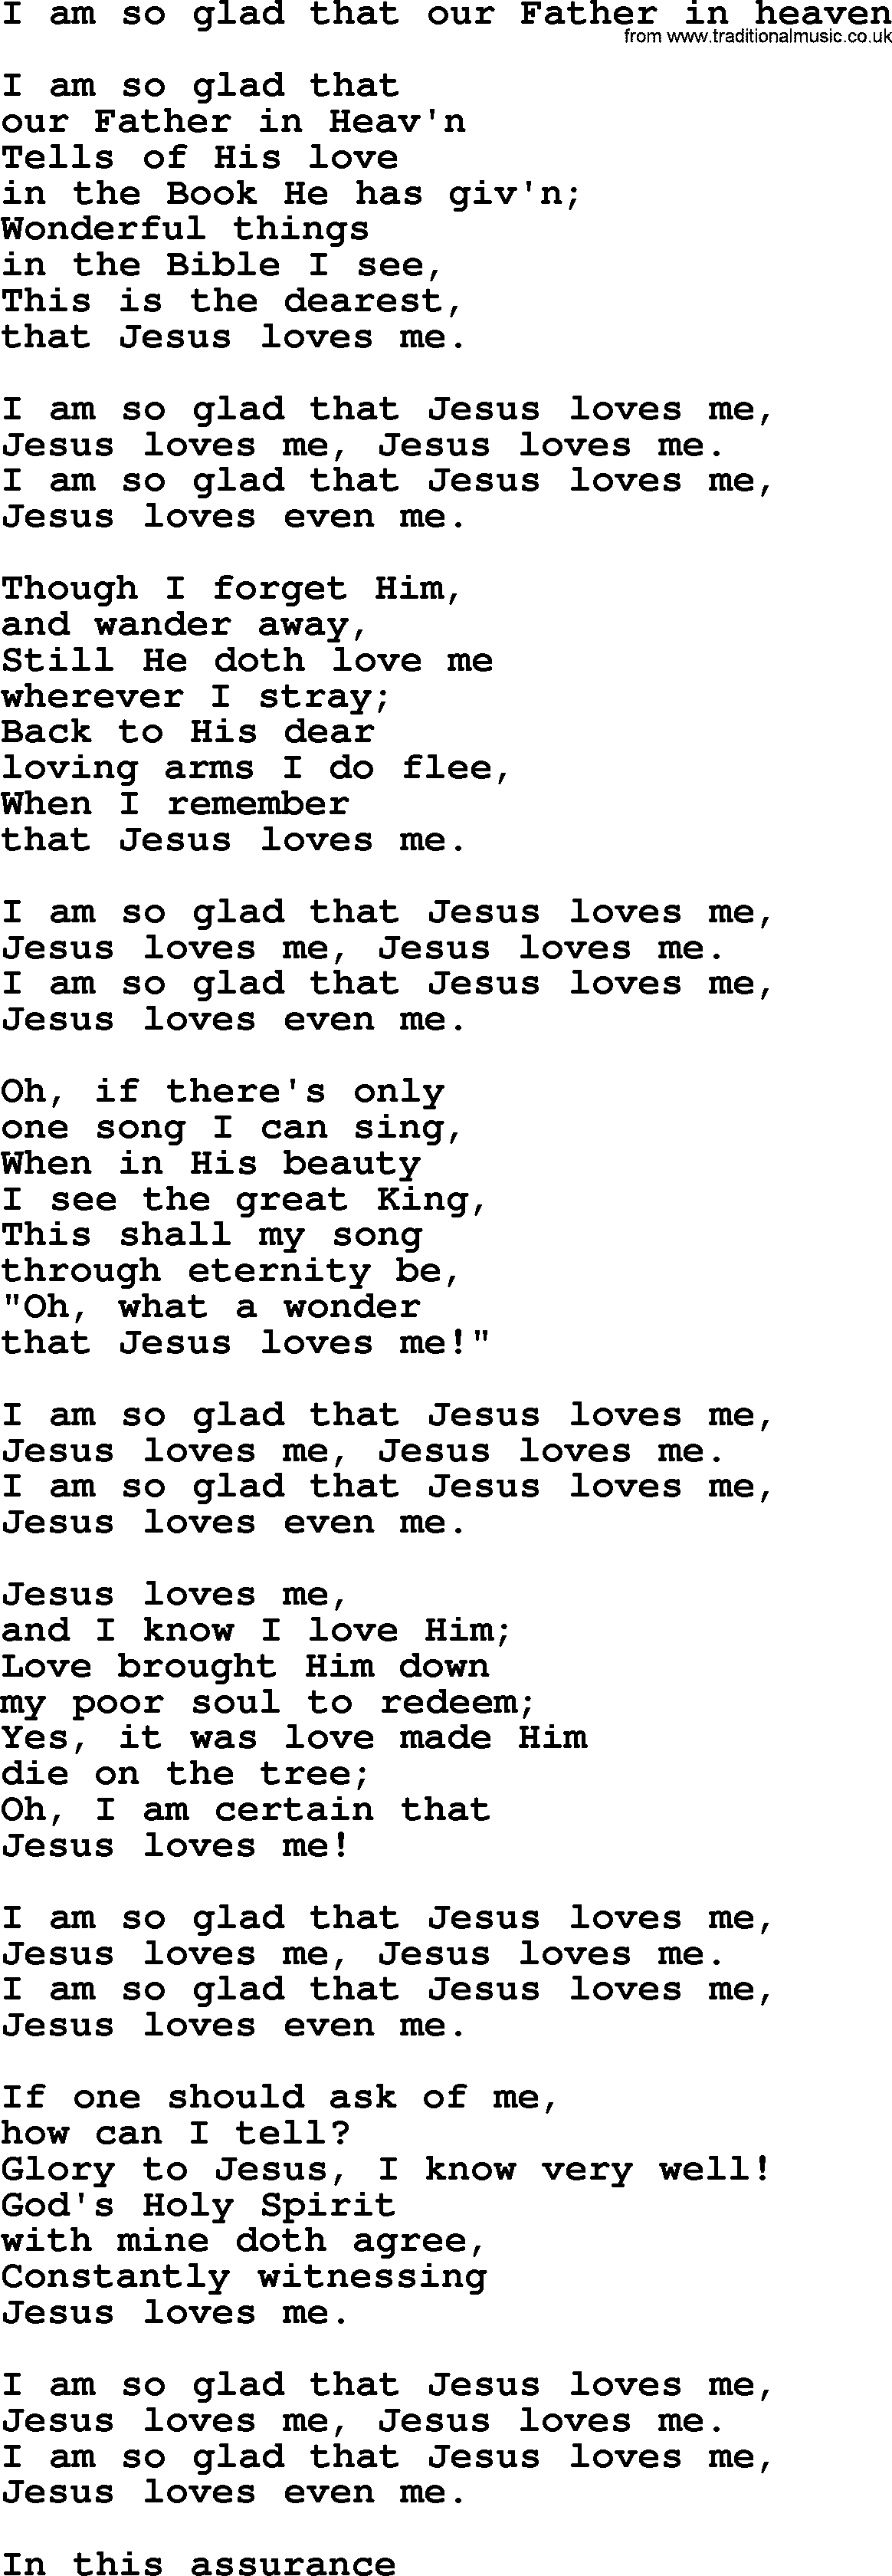 Sacred Songs and Solos complete, 1200 Hymns, title: I Am So Glad That Our Father In Heaven, lyrics and PDF